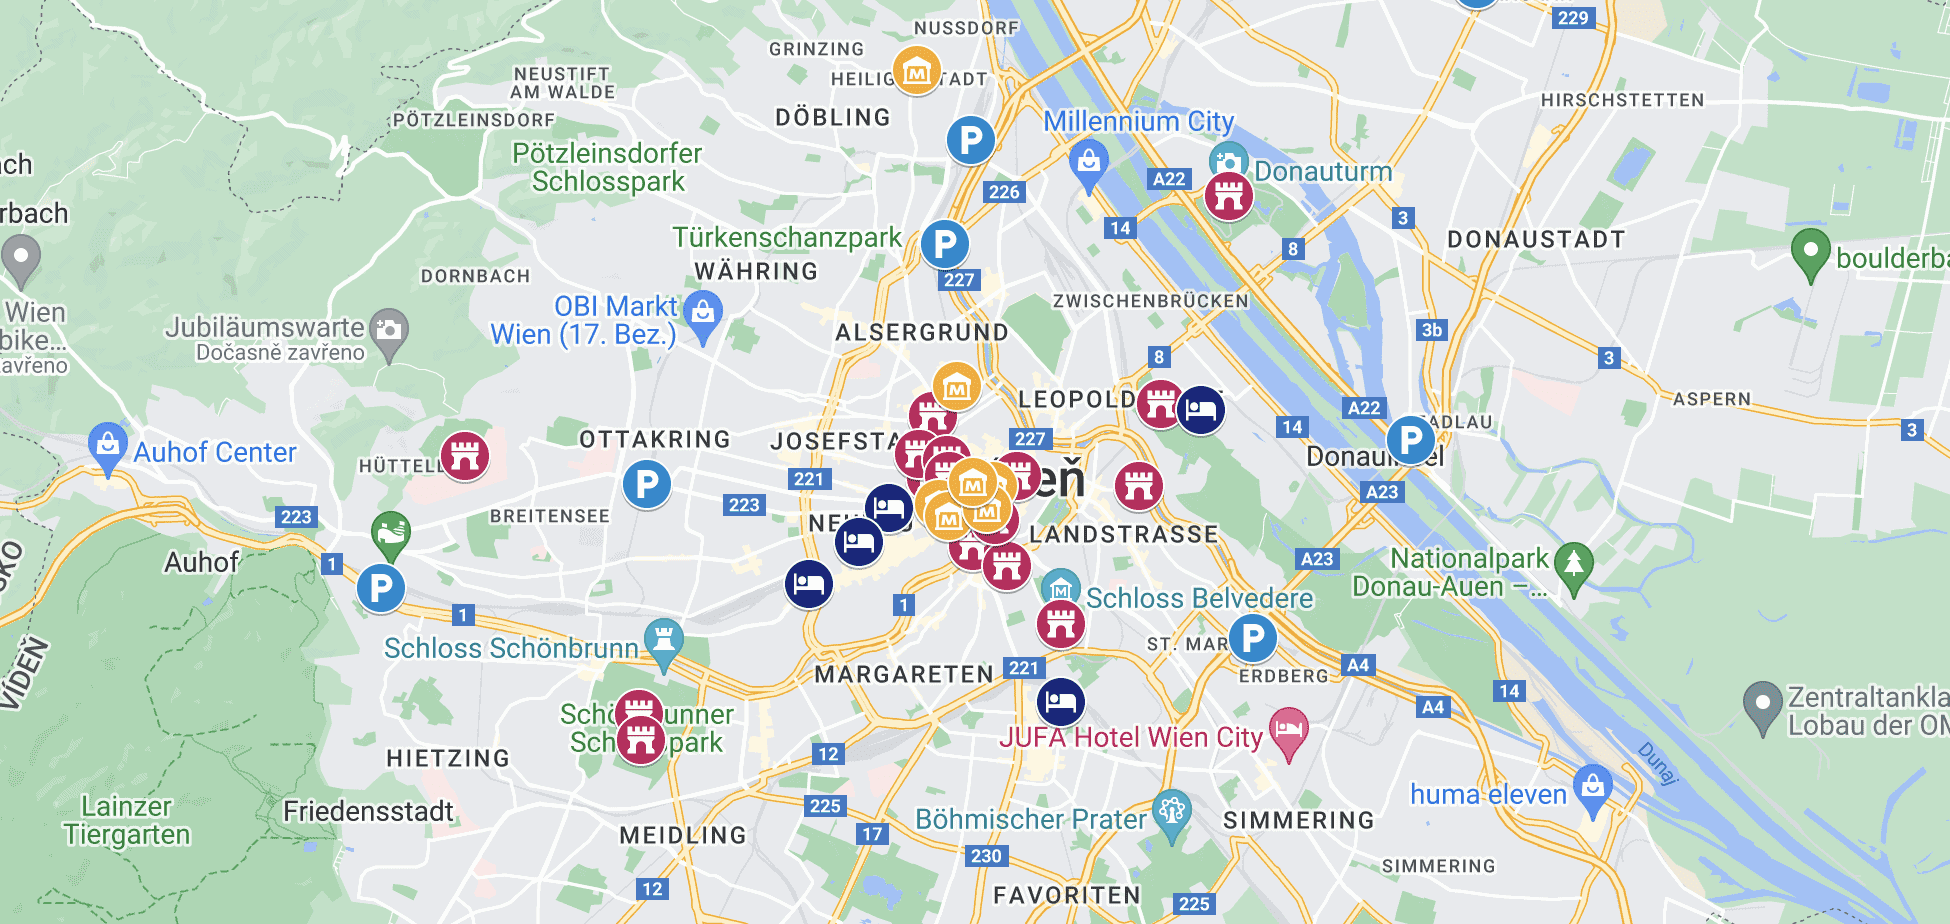 Download a map of Vienna